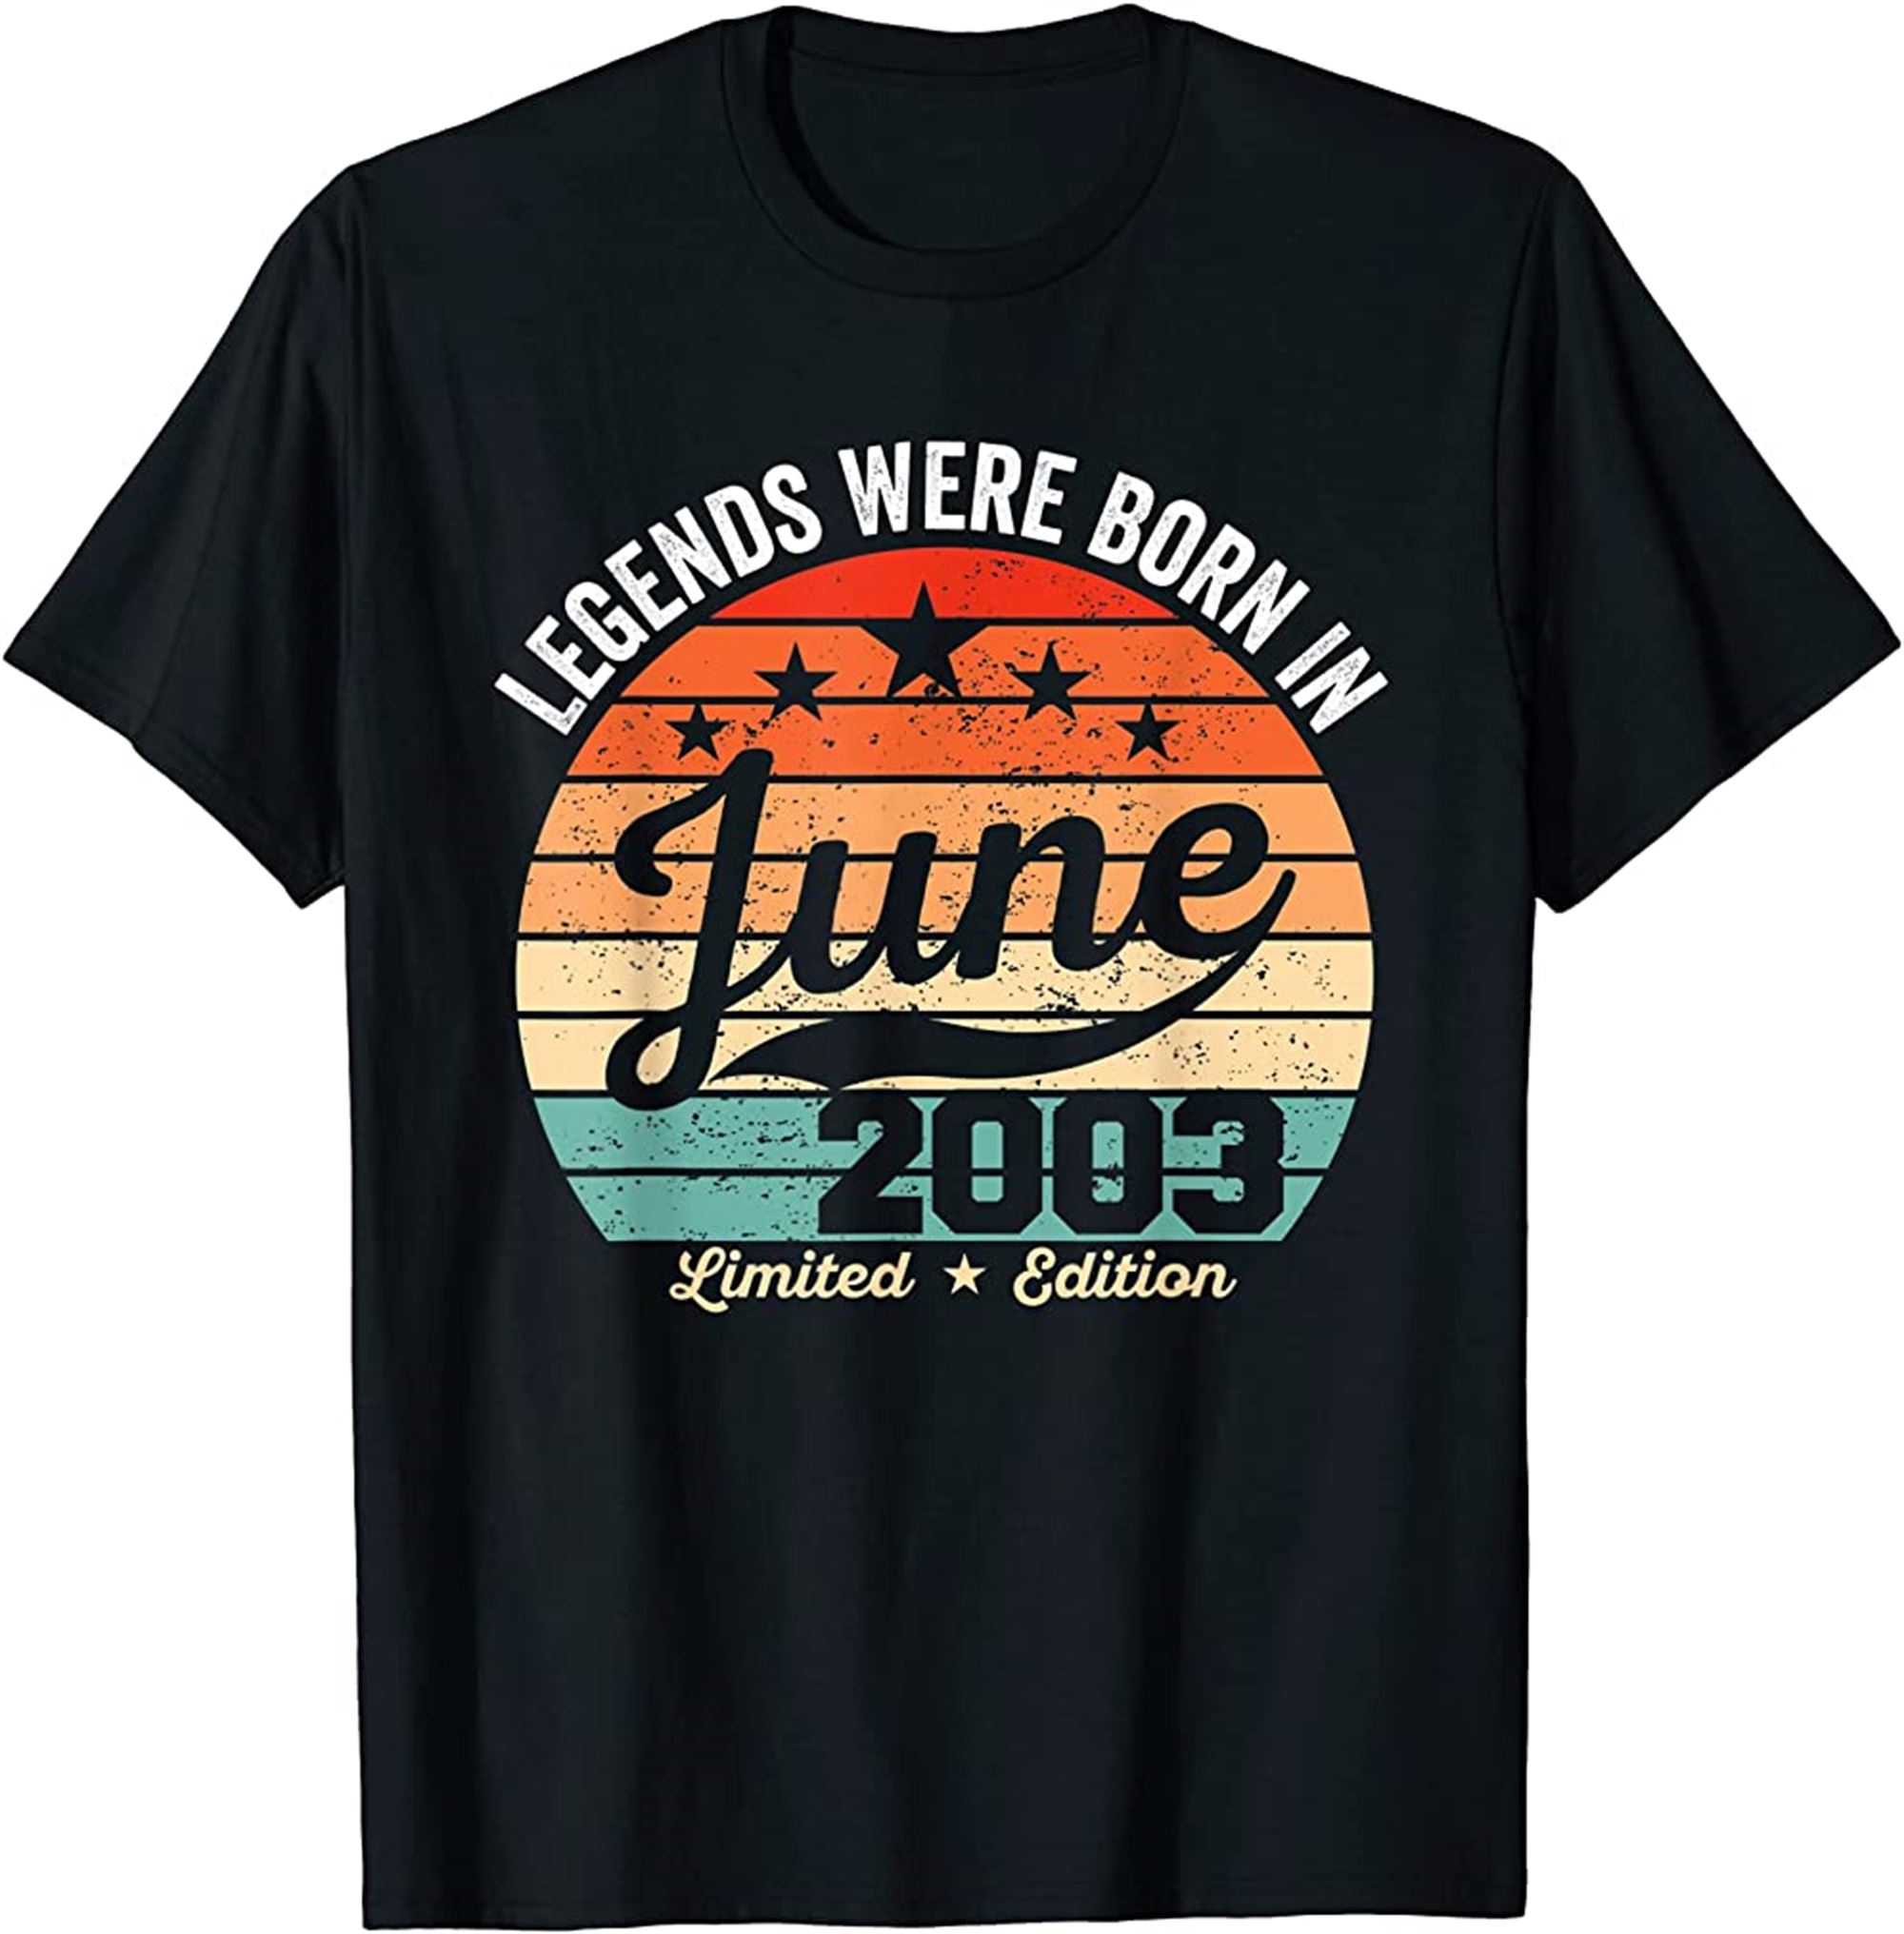 Vintage 19th Birthday Legends Were Born In June 2003 T-shirt Full Size Up To 5xl